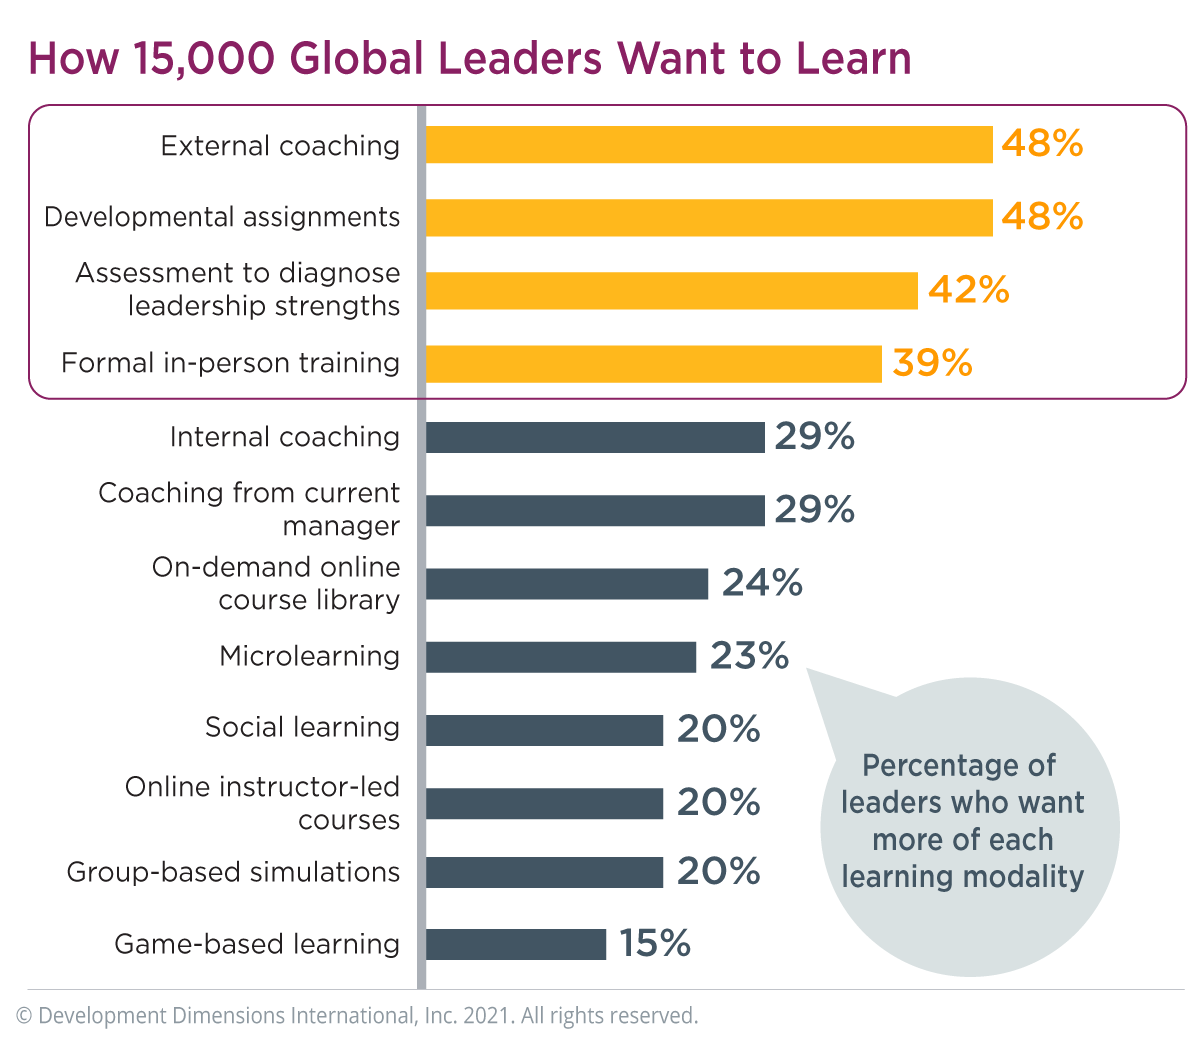 percentages of the learning modalities leaders want most, with the top five modalities highlighted: External coaching (48%), Developmental assignments (48%), Assessment to diagnose leadership strengths (42%), and Formal in-person training (39%)